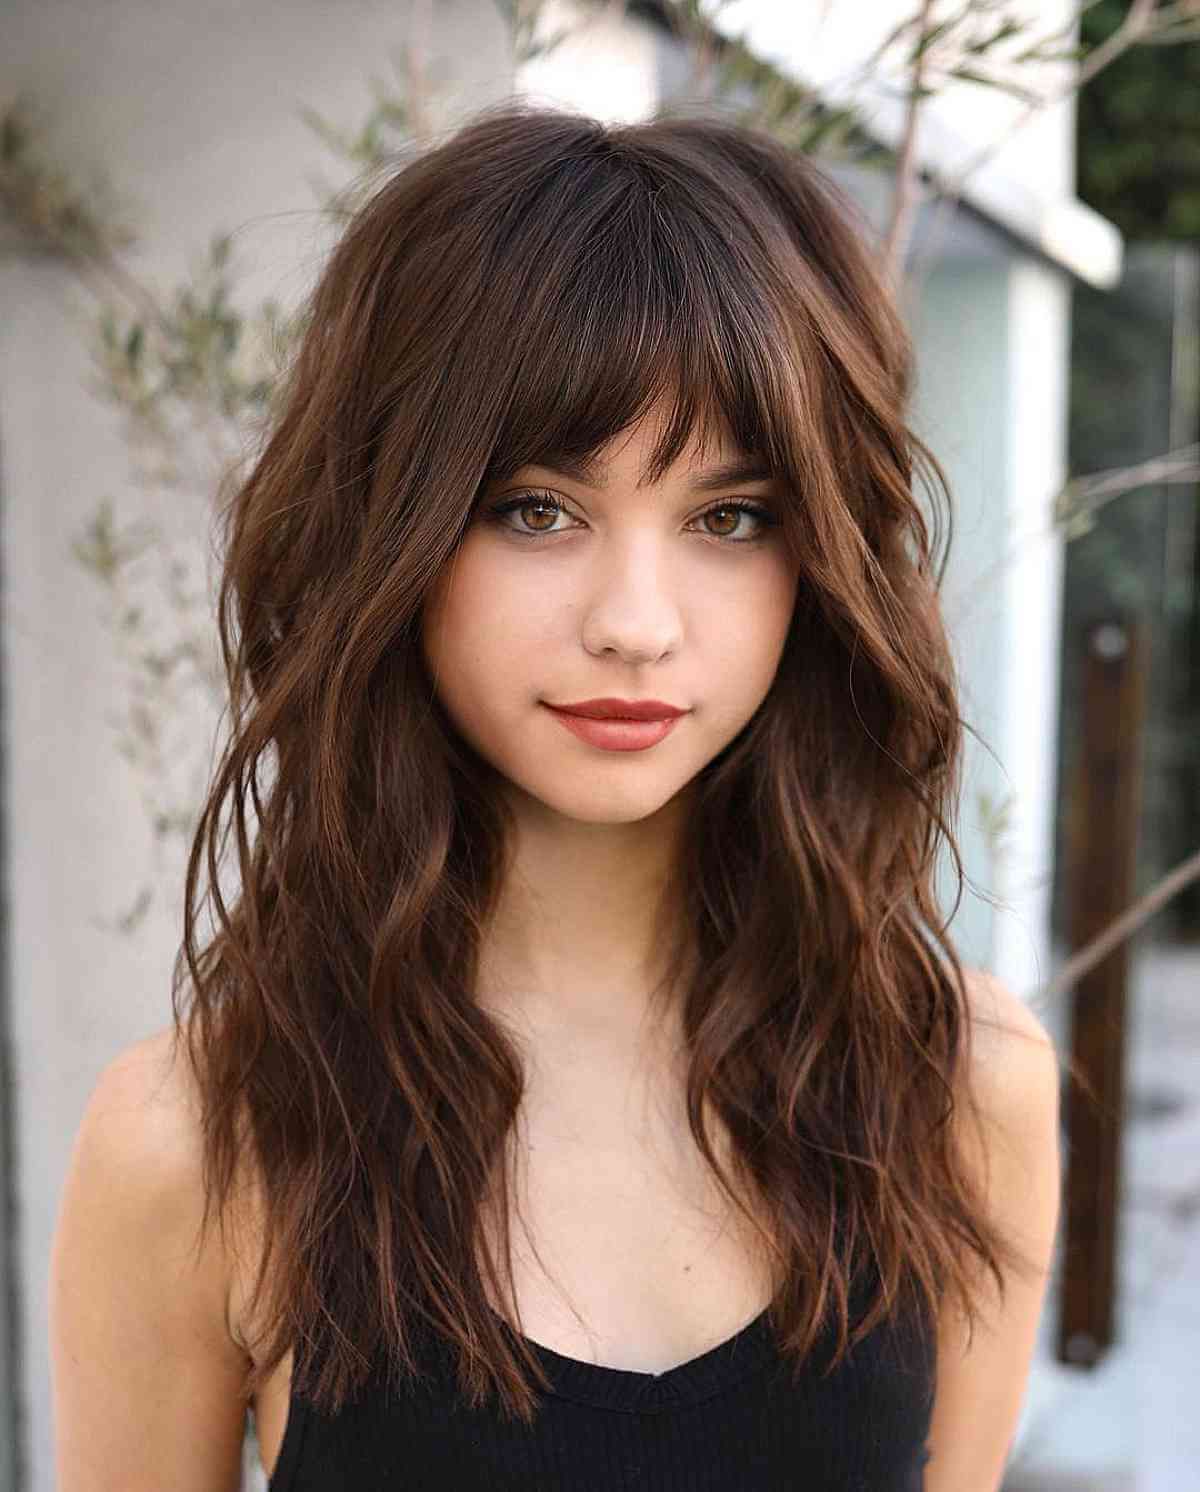 44 Trendy Medium Layered Haircuts With Bangs With 2018 Dip Dye Medium Layered Hair With Bangs (View 11 of 15)